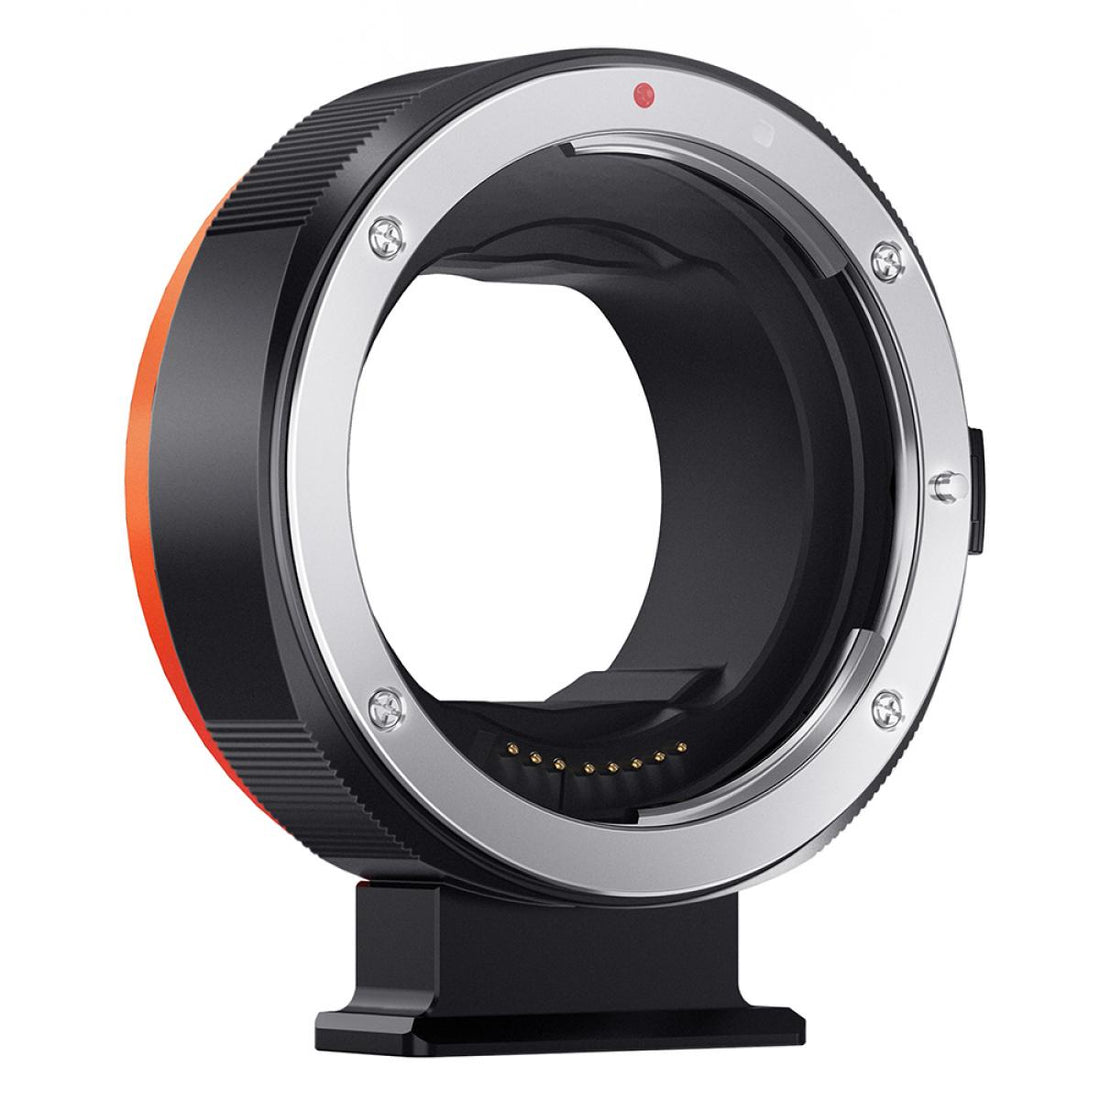 K&amp;F PRO Auto Focus Lens Adapter for Canon EF &amp; EF-S Lenses to Canon R Mount - KF06-467